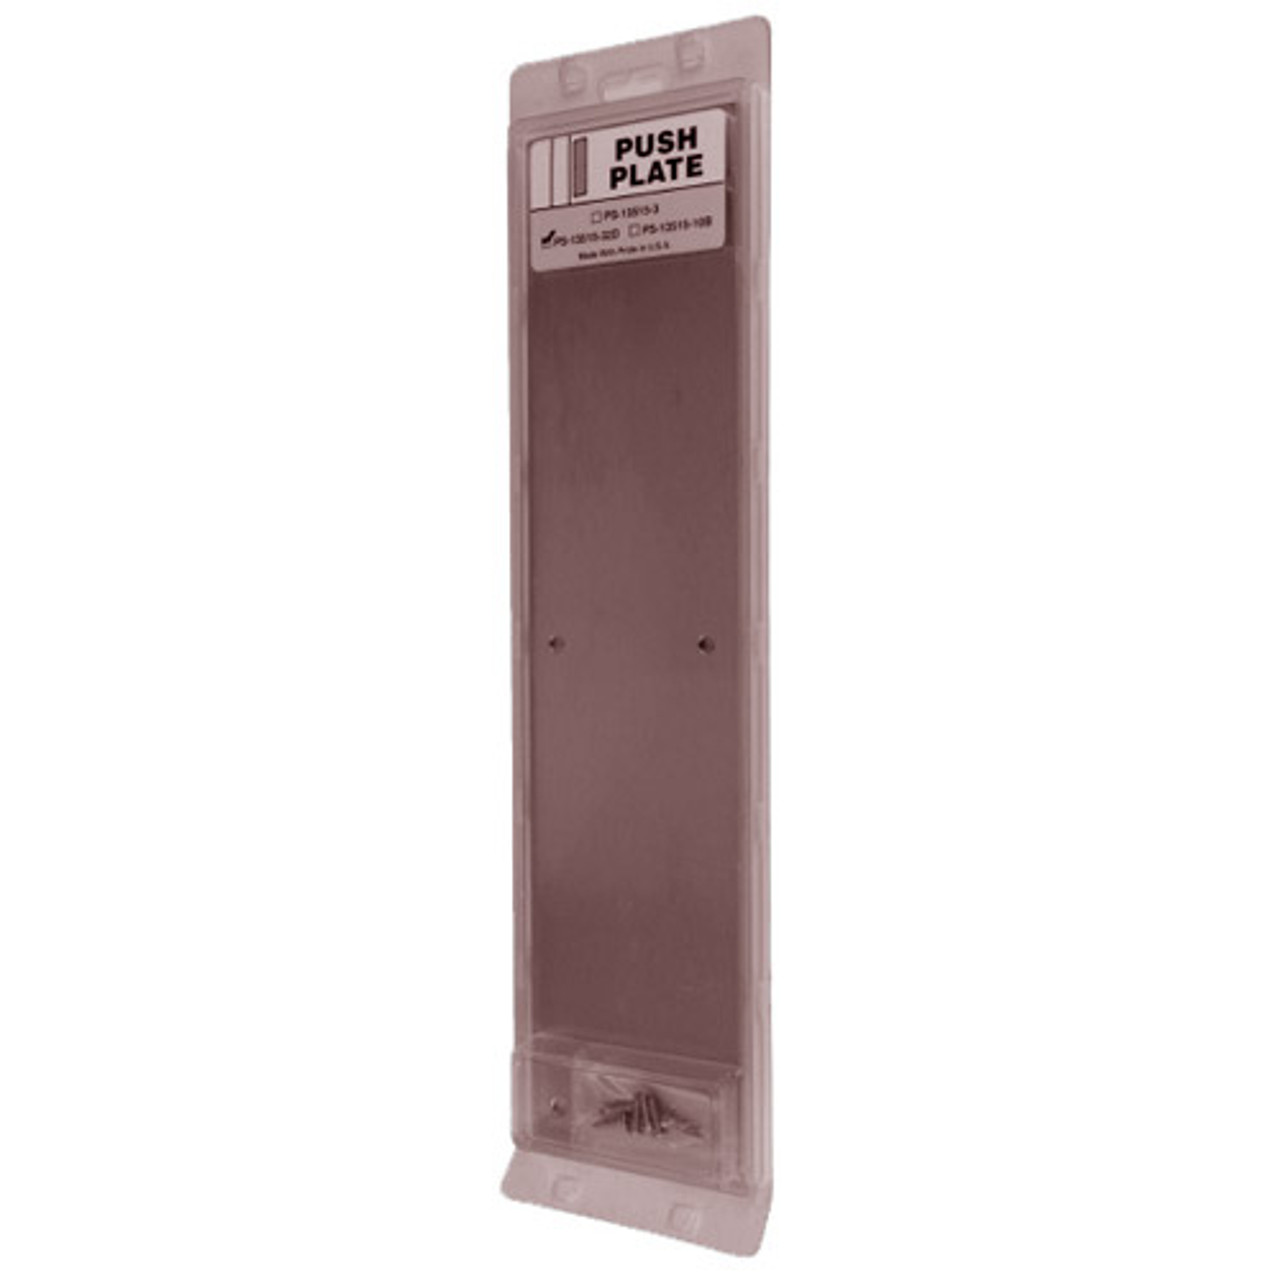 PS-13515-613 Don Jo Push Plate in Oil Rubbed Bronze Finish